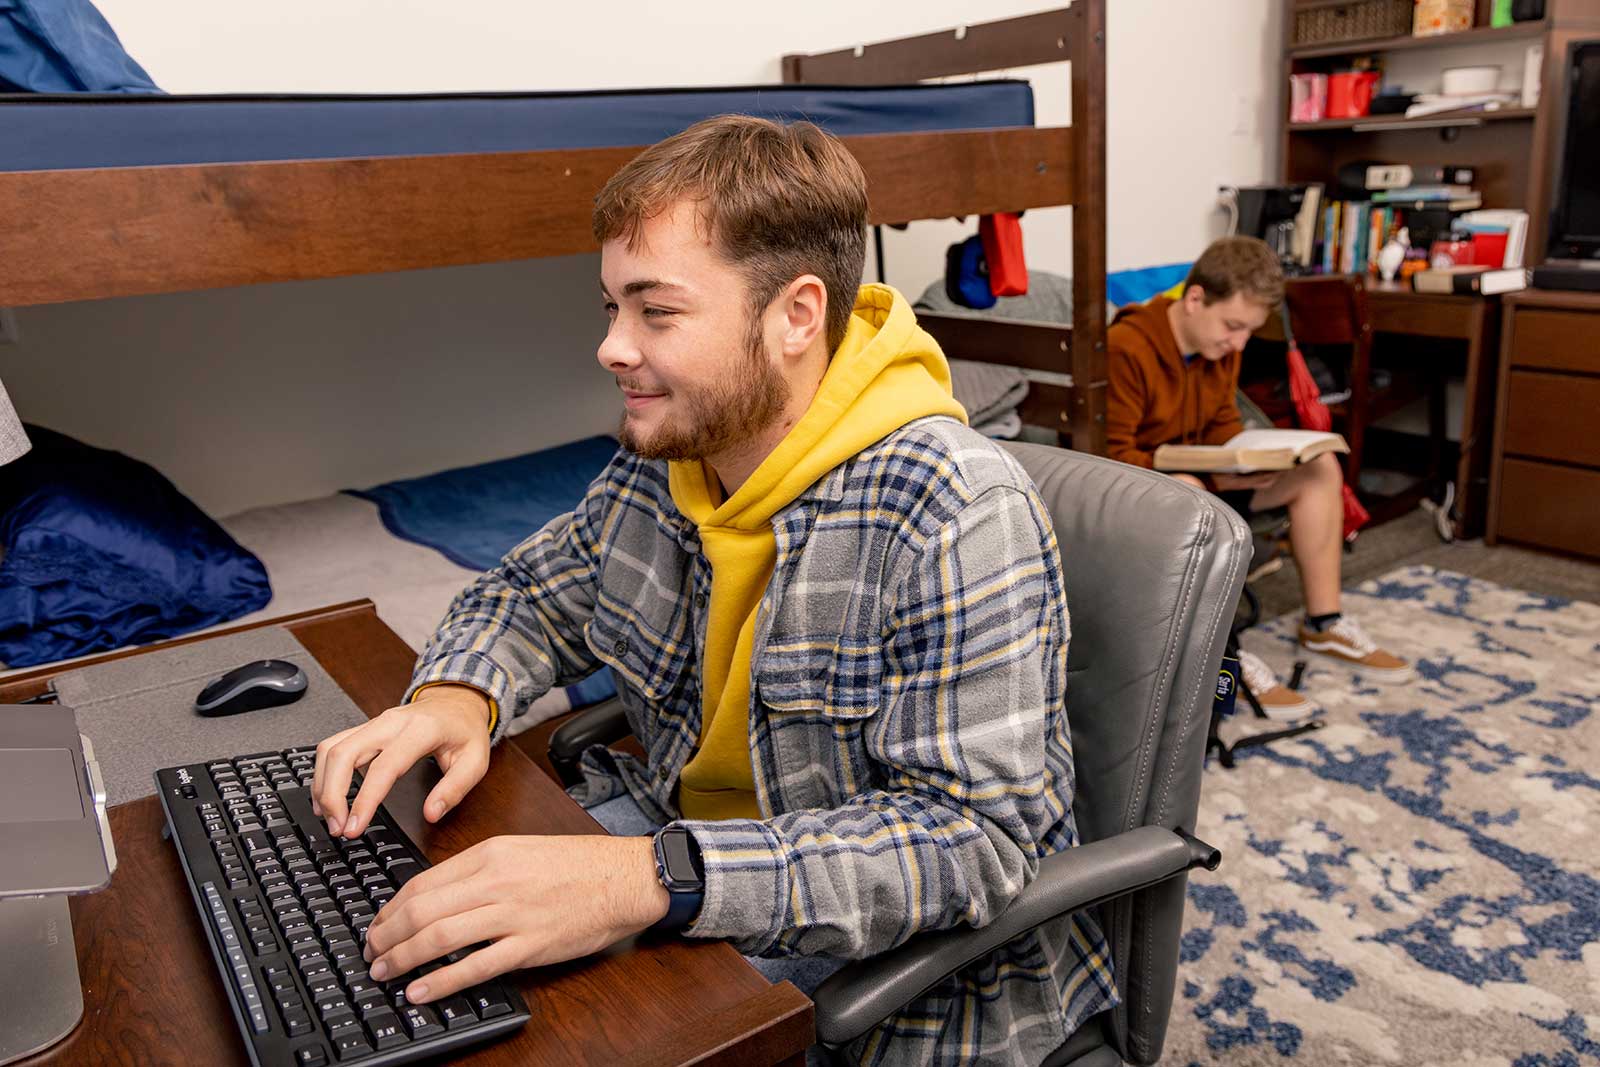 Graphic design students at FHU will work with real-world projects while growing in visual storytelling and digital design principles.